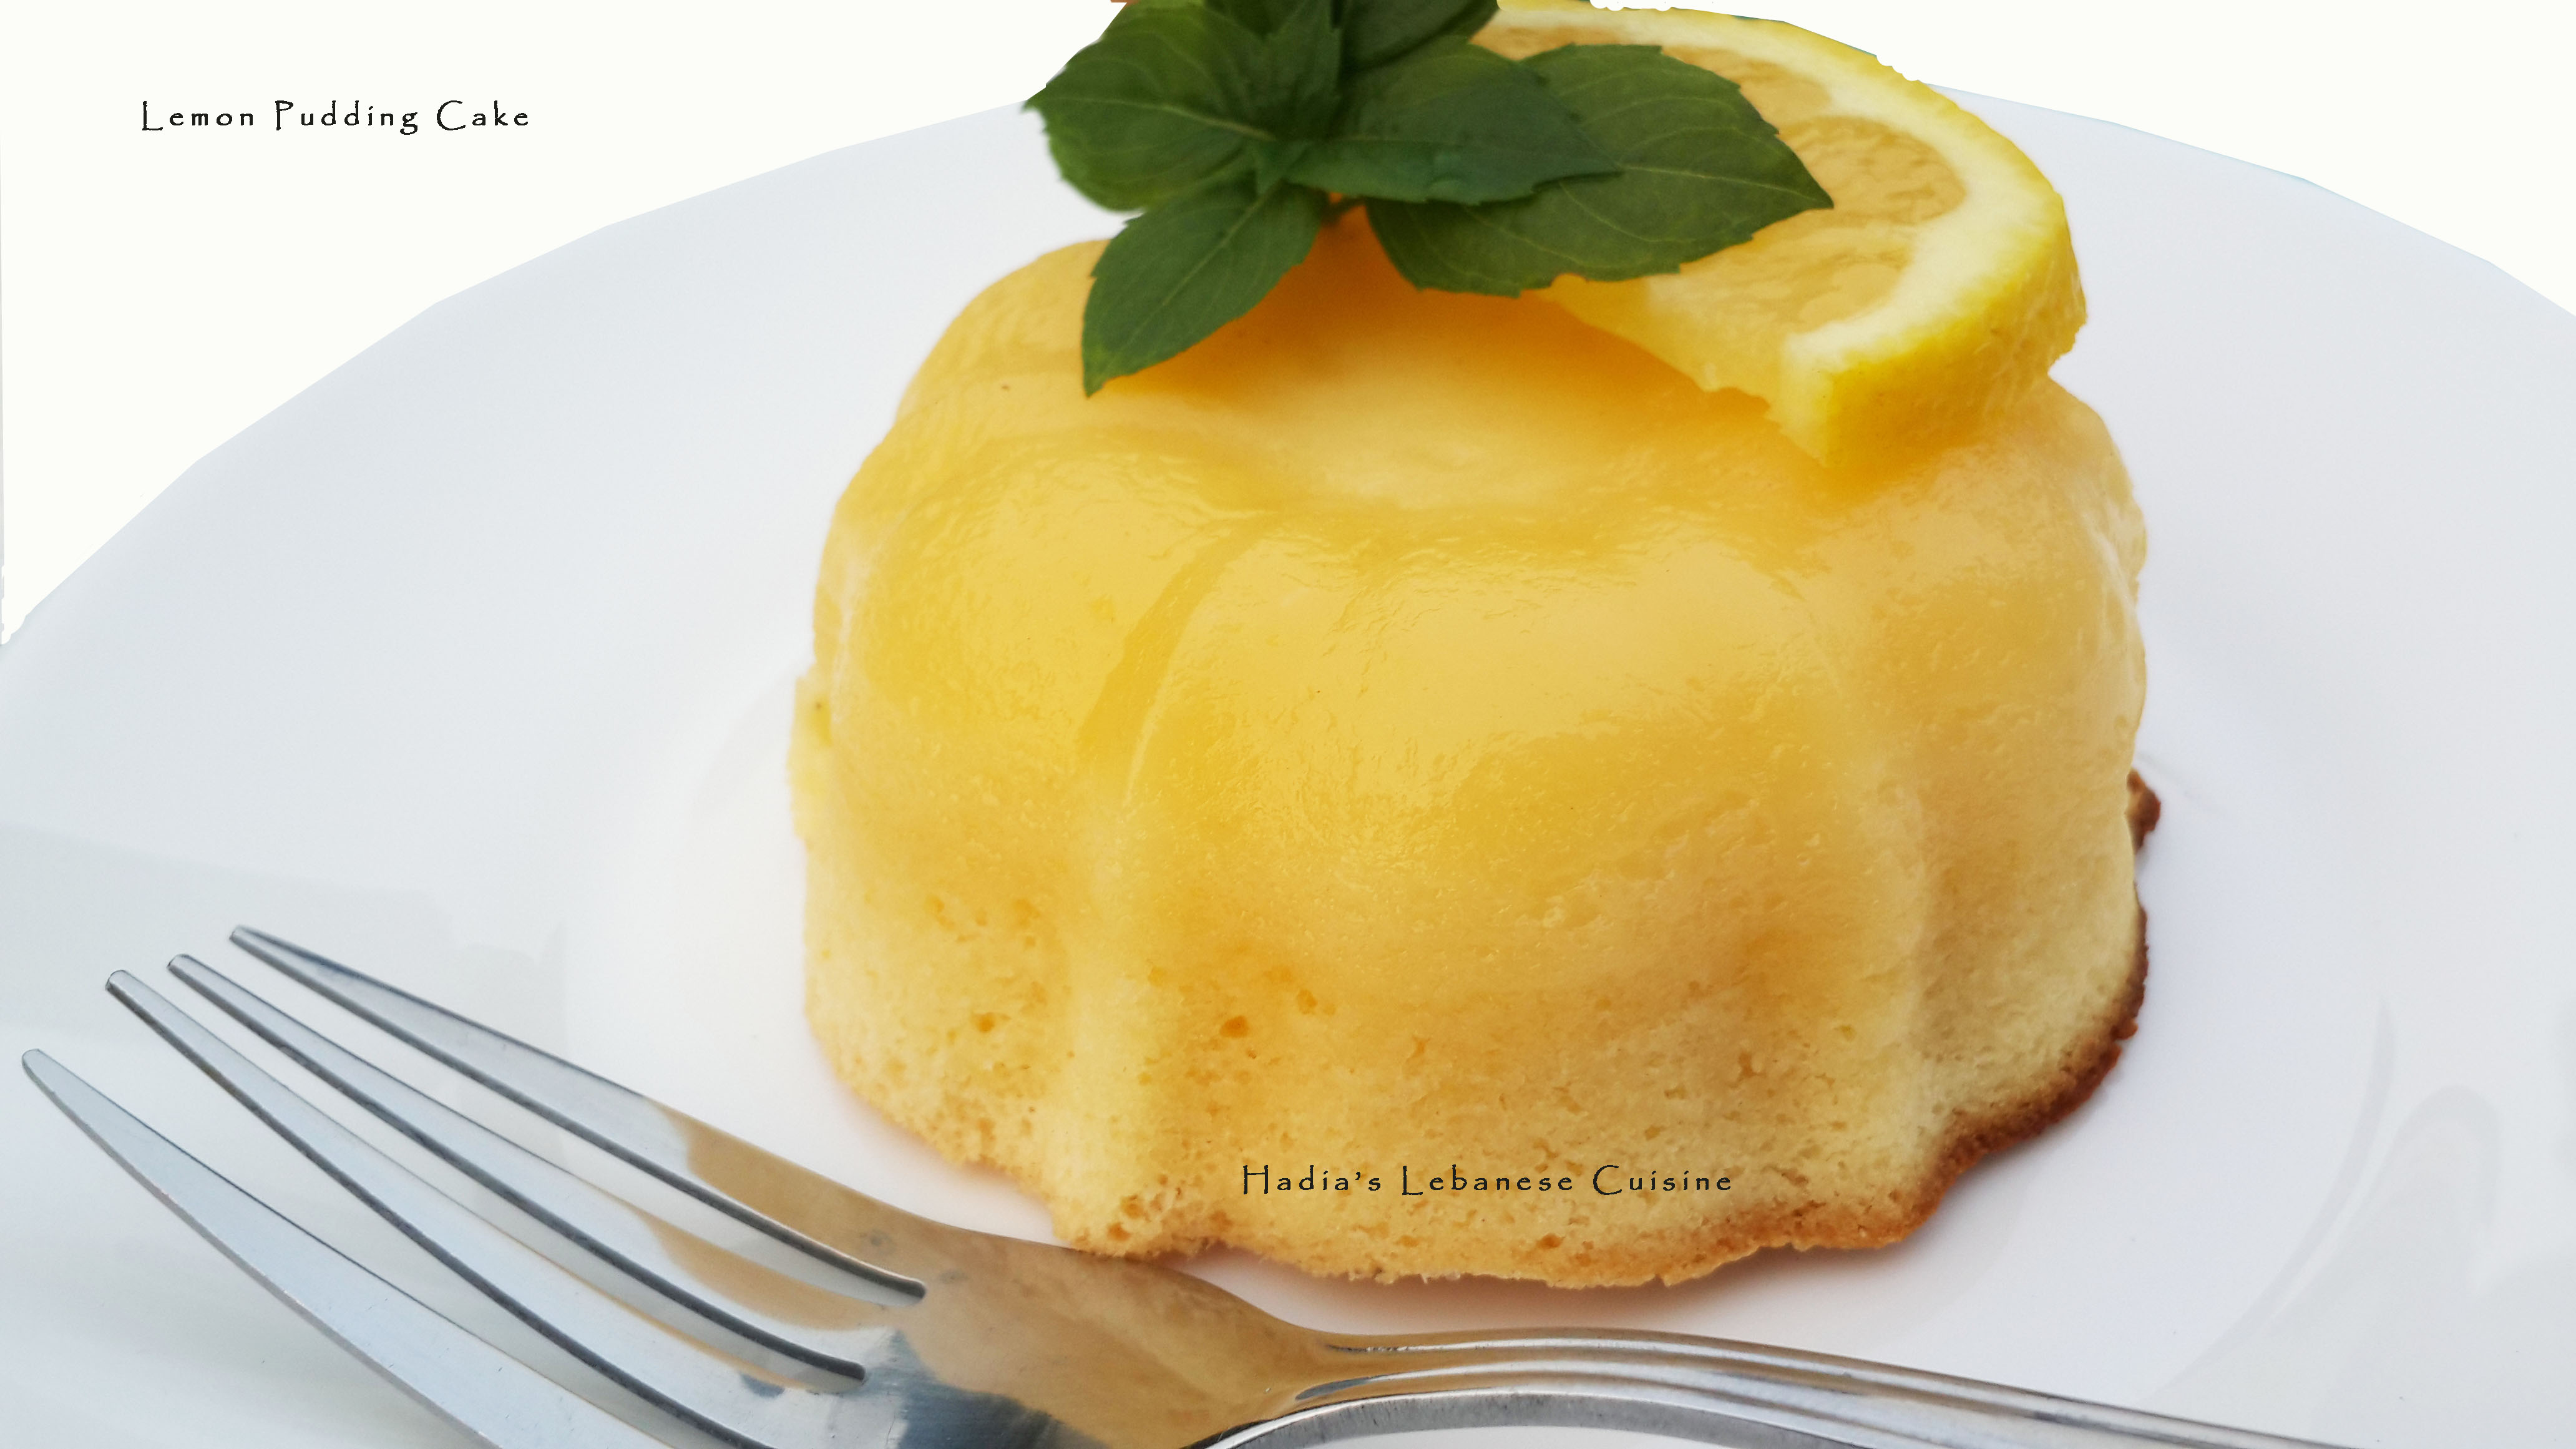 Lemon Pudding Cake...These ramekins start out as one batter that almost magically separate into two distinct layers – a fluffy cake and a warm lemon pudding.  Well it is not magic at all – it is science.